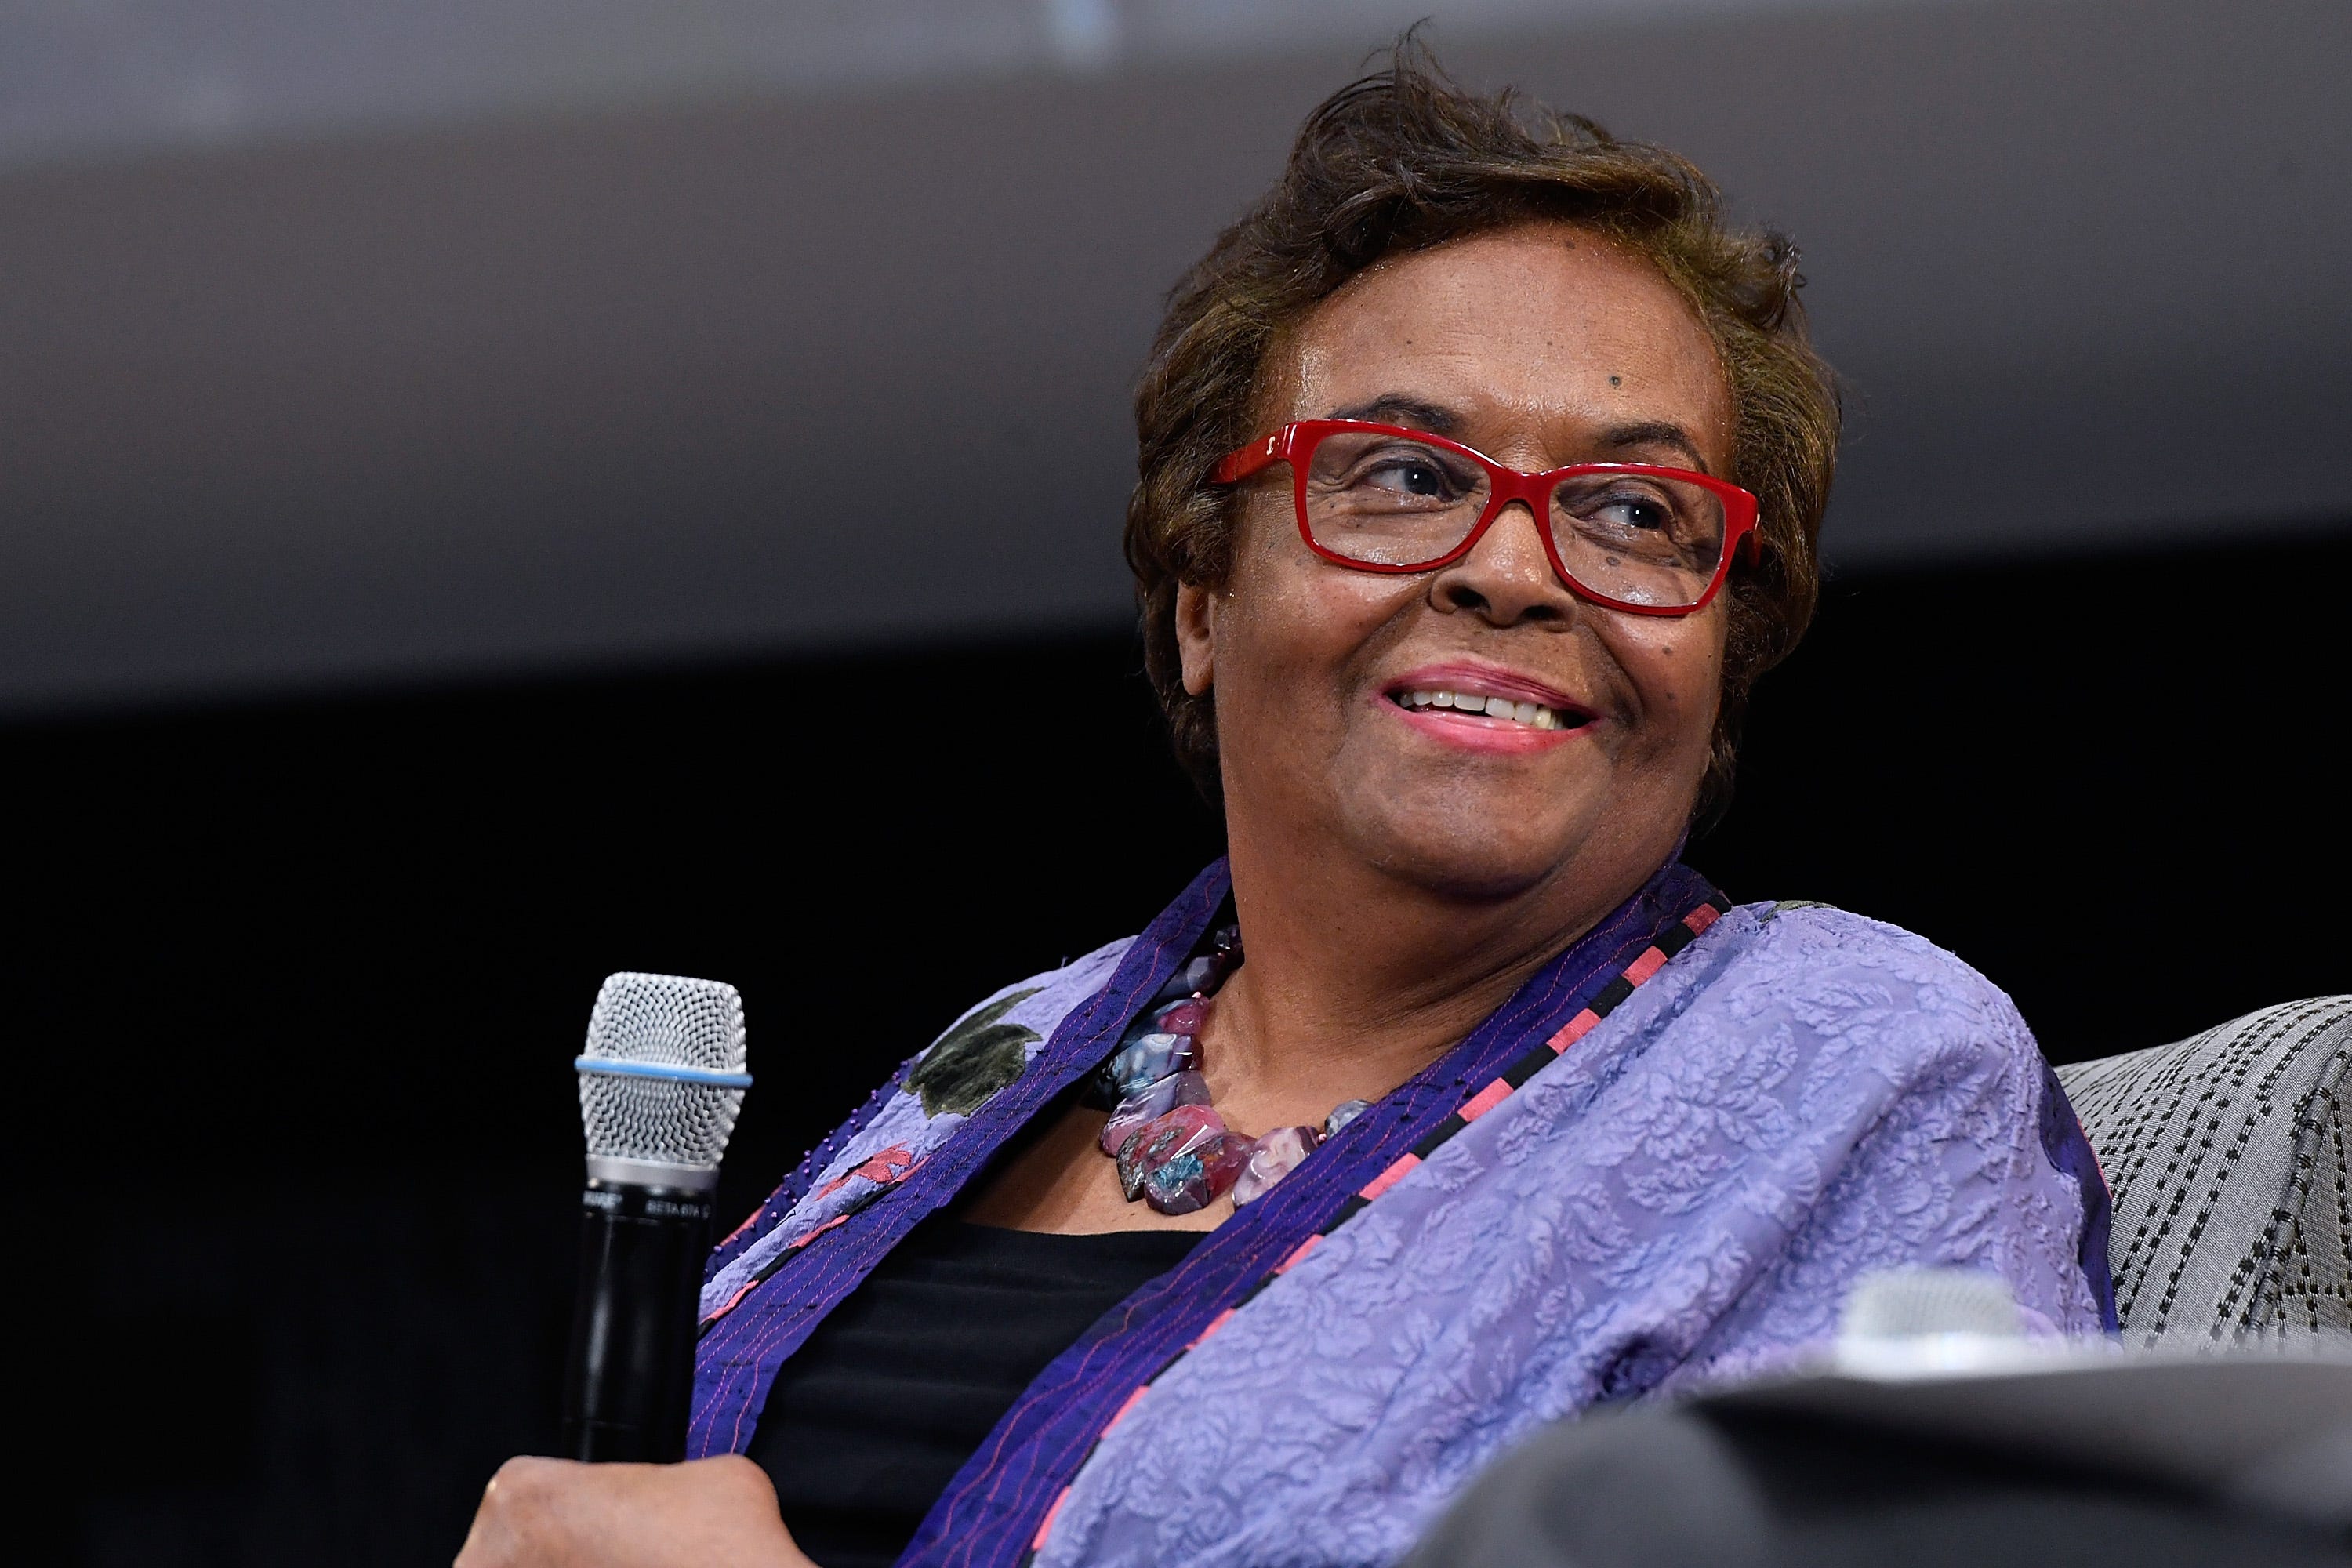 Author and activist Joyce Ladner participates in a panel discussion on "Race And Society In Nazi Germany and the U.S." at the Holocaust Memorial Museum on July 18, 2018, in Washington.